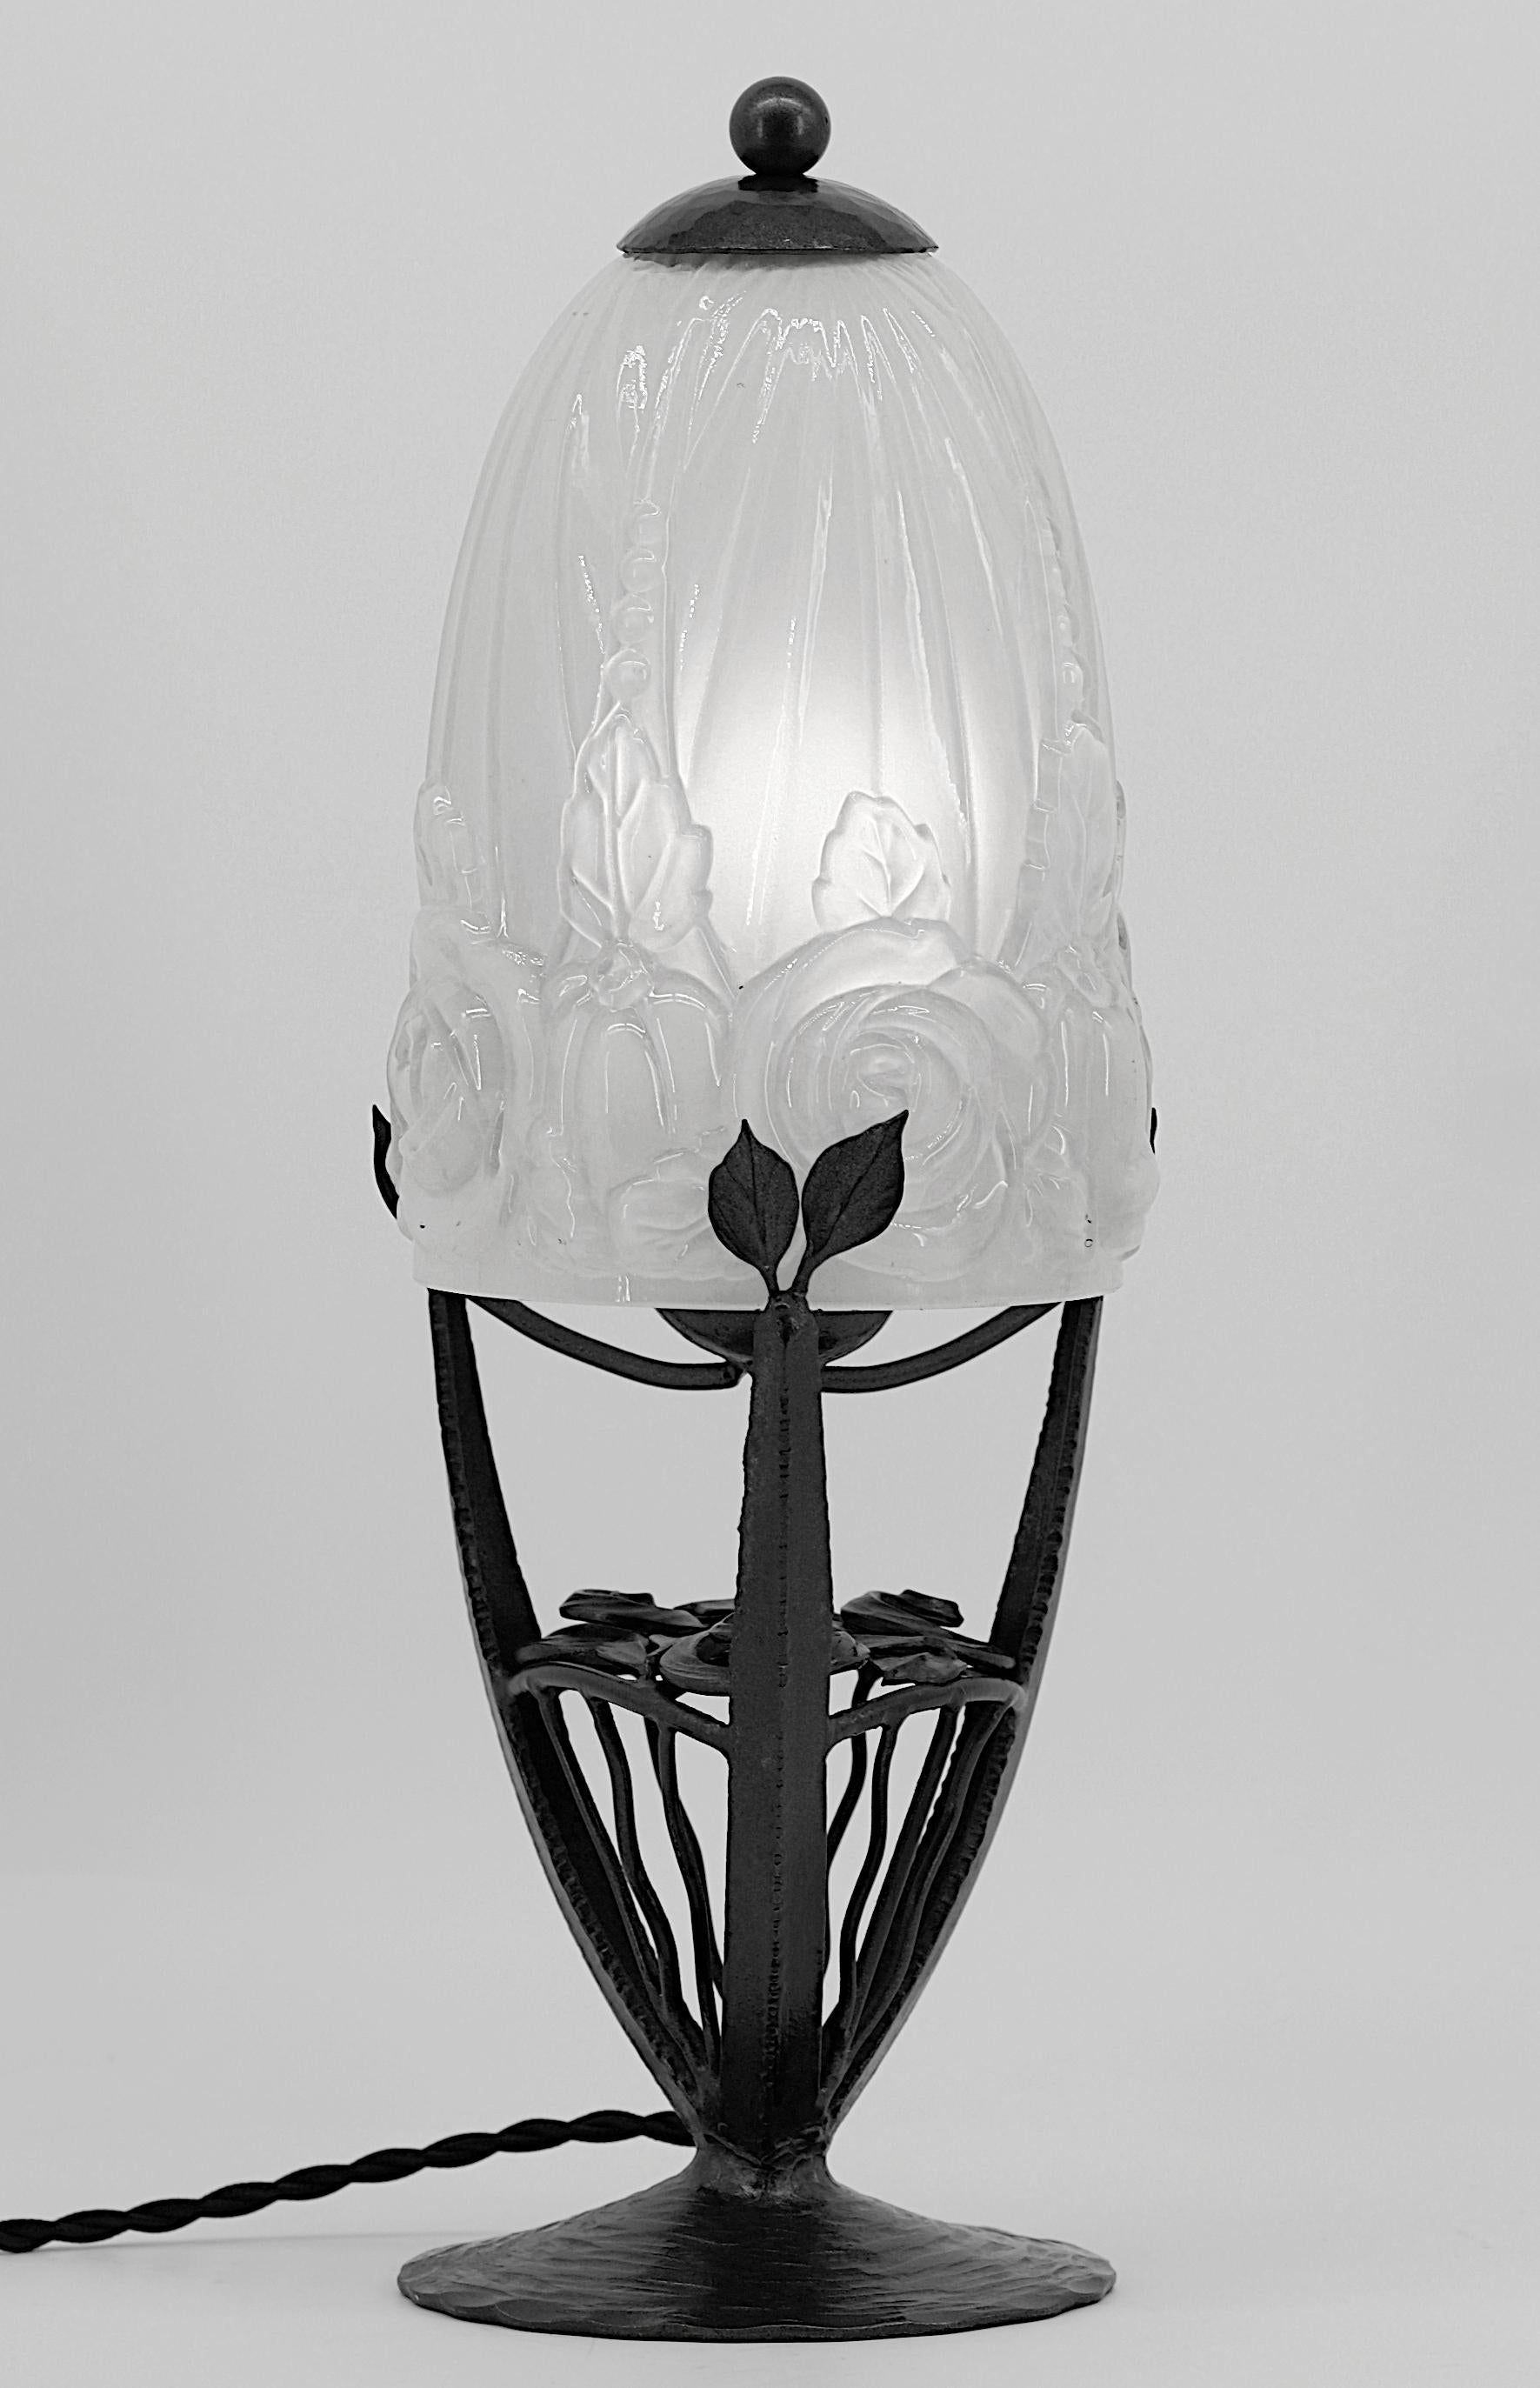 French Art Deco table lamp by HETTIER-VINCENT, 10 rue de Turenne in Paris, France, ca.1925. Glass & wrought-iron. Delicious wrought iron base by Hettier-Vincent hosting a semi-crystal lampshade by Baccarat. This lampshade is named 